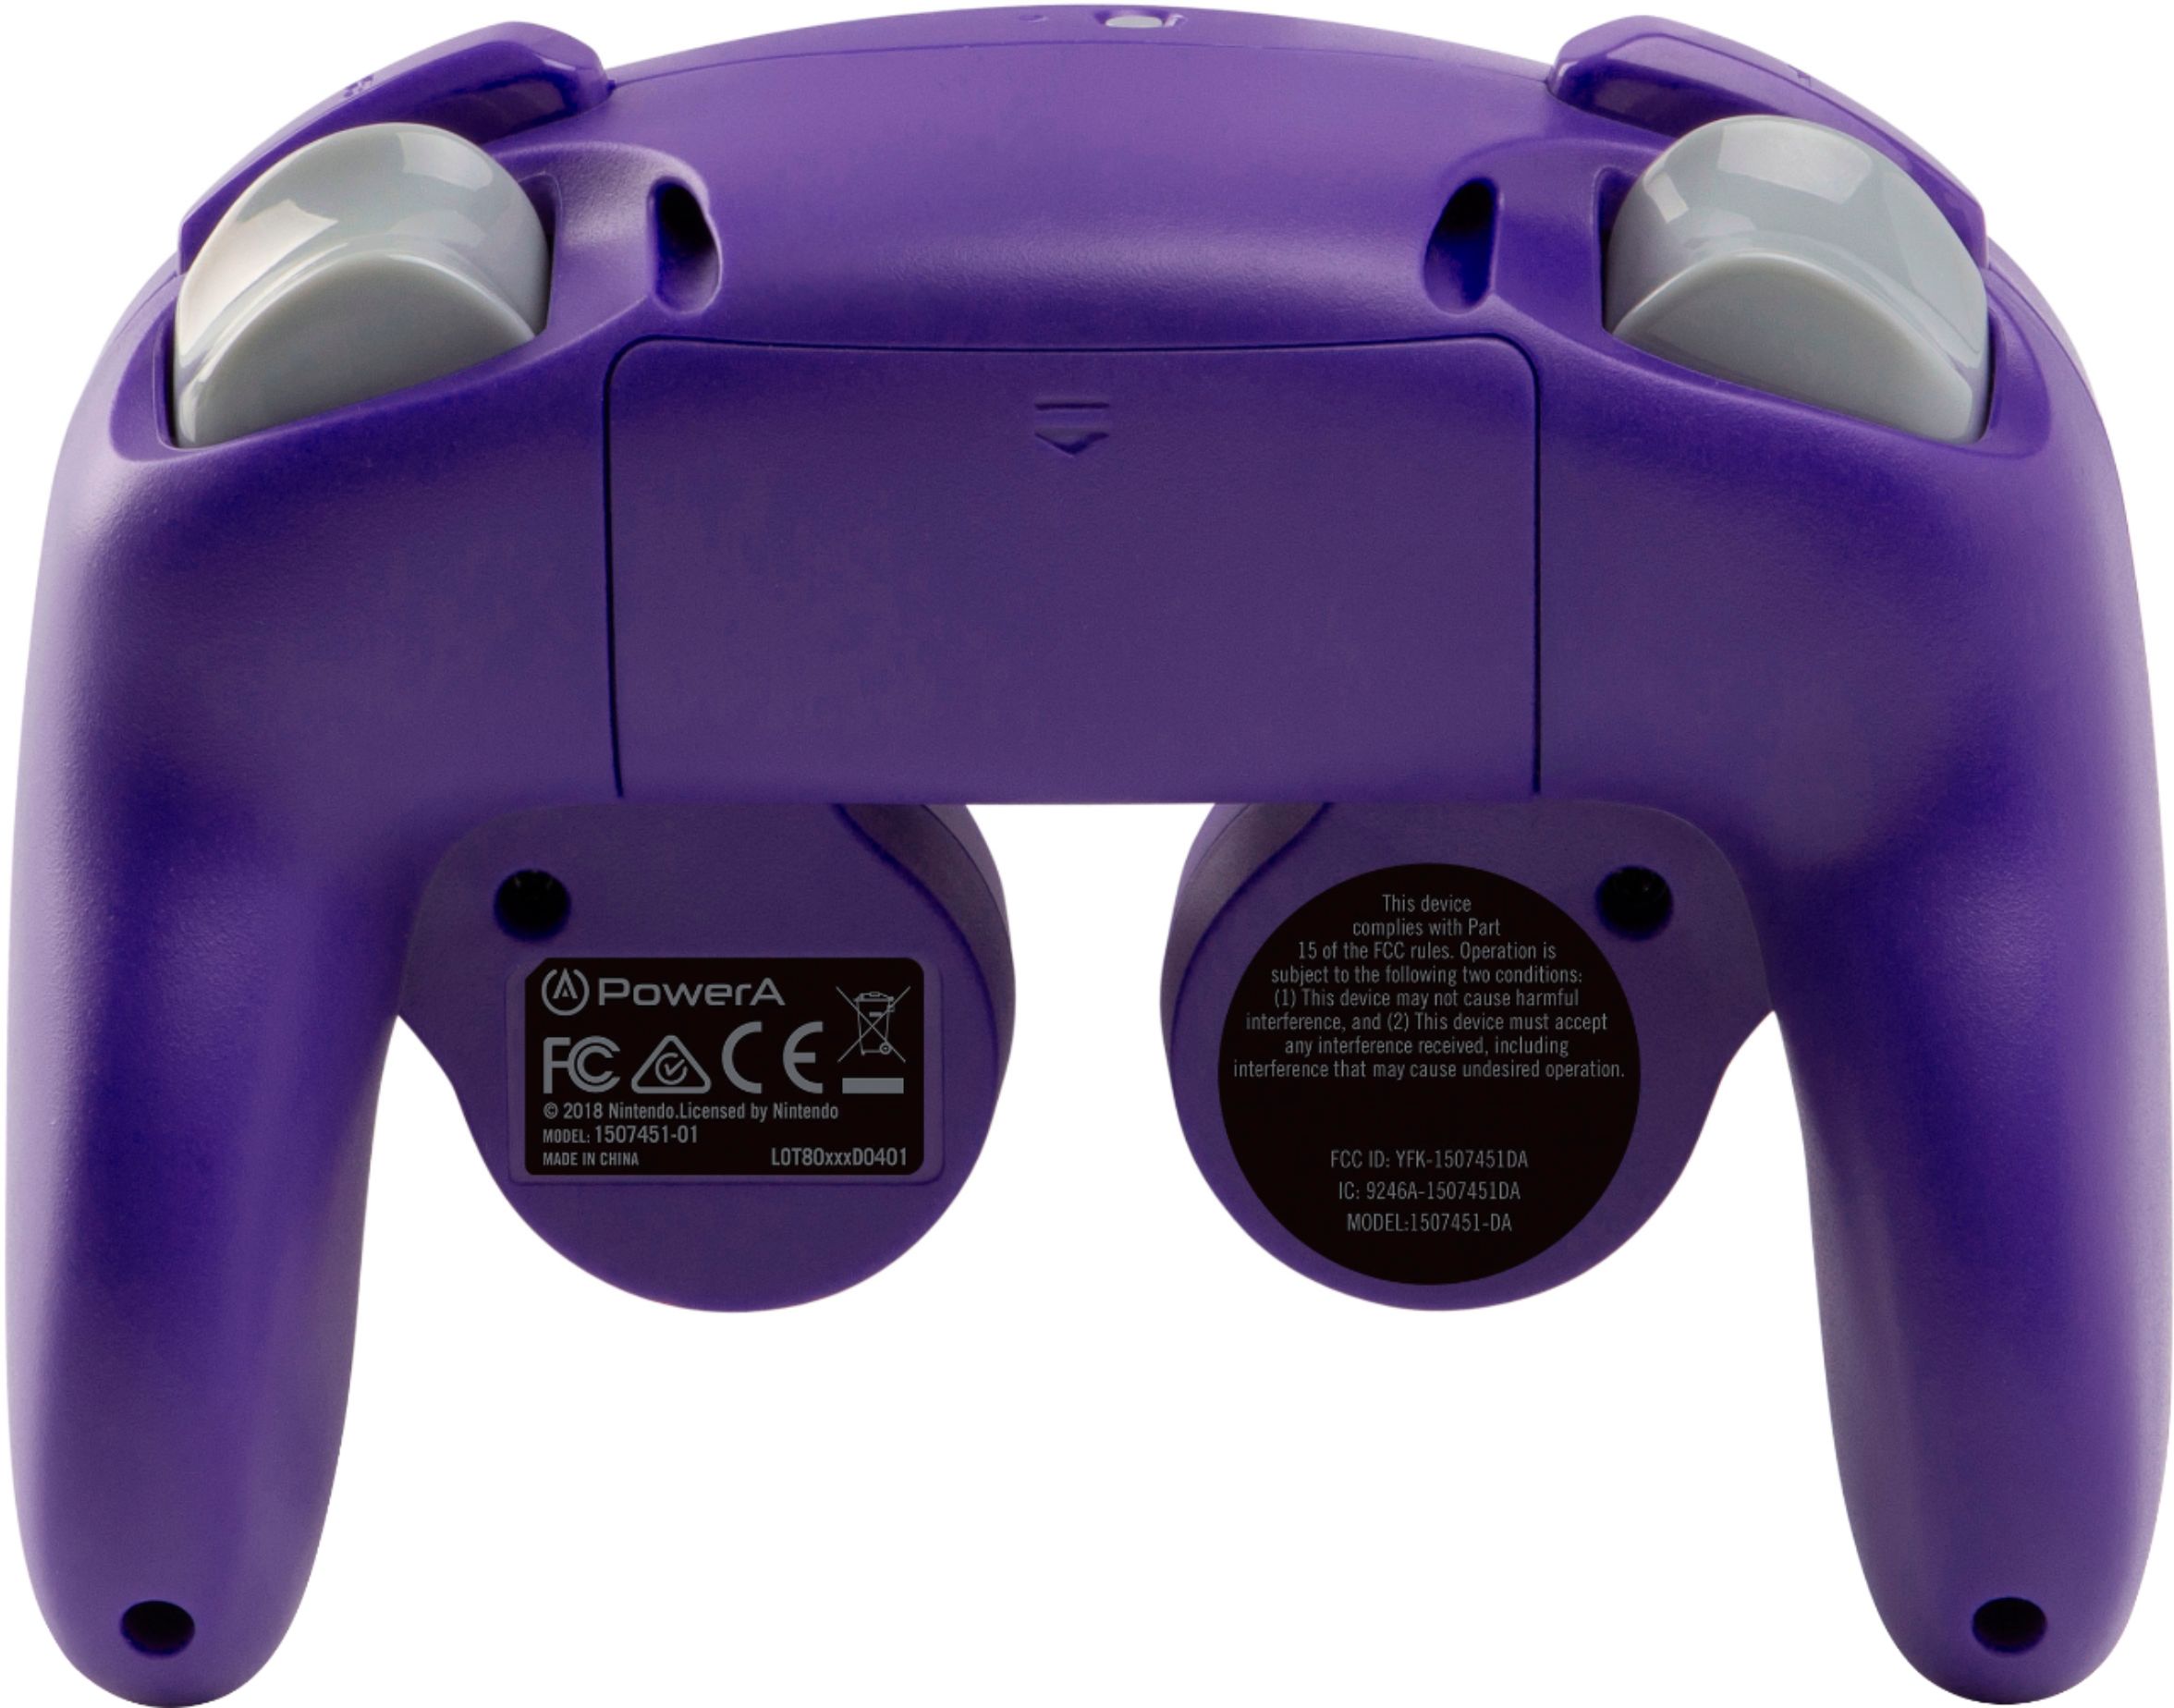 power a switch gamecube controller